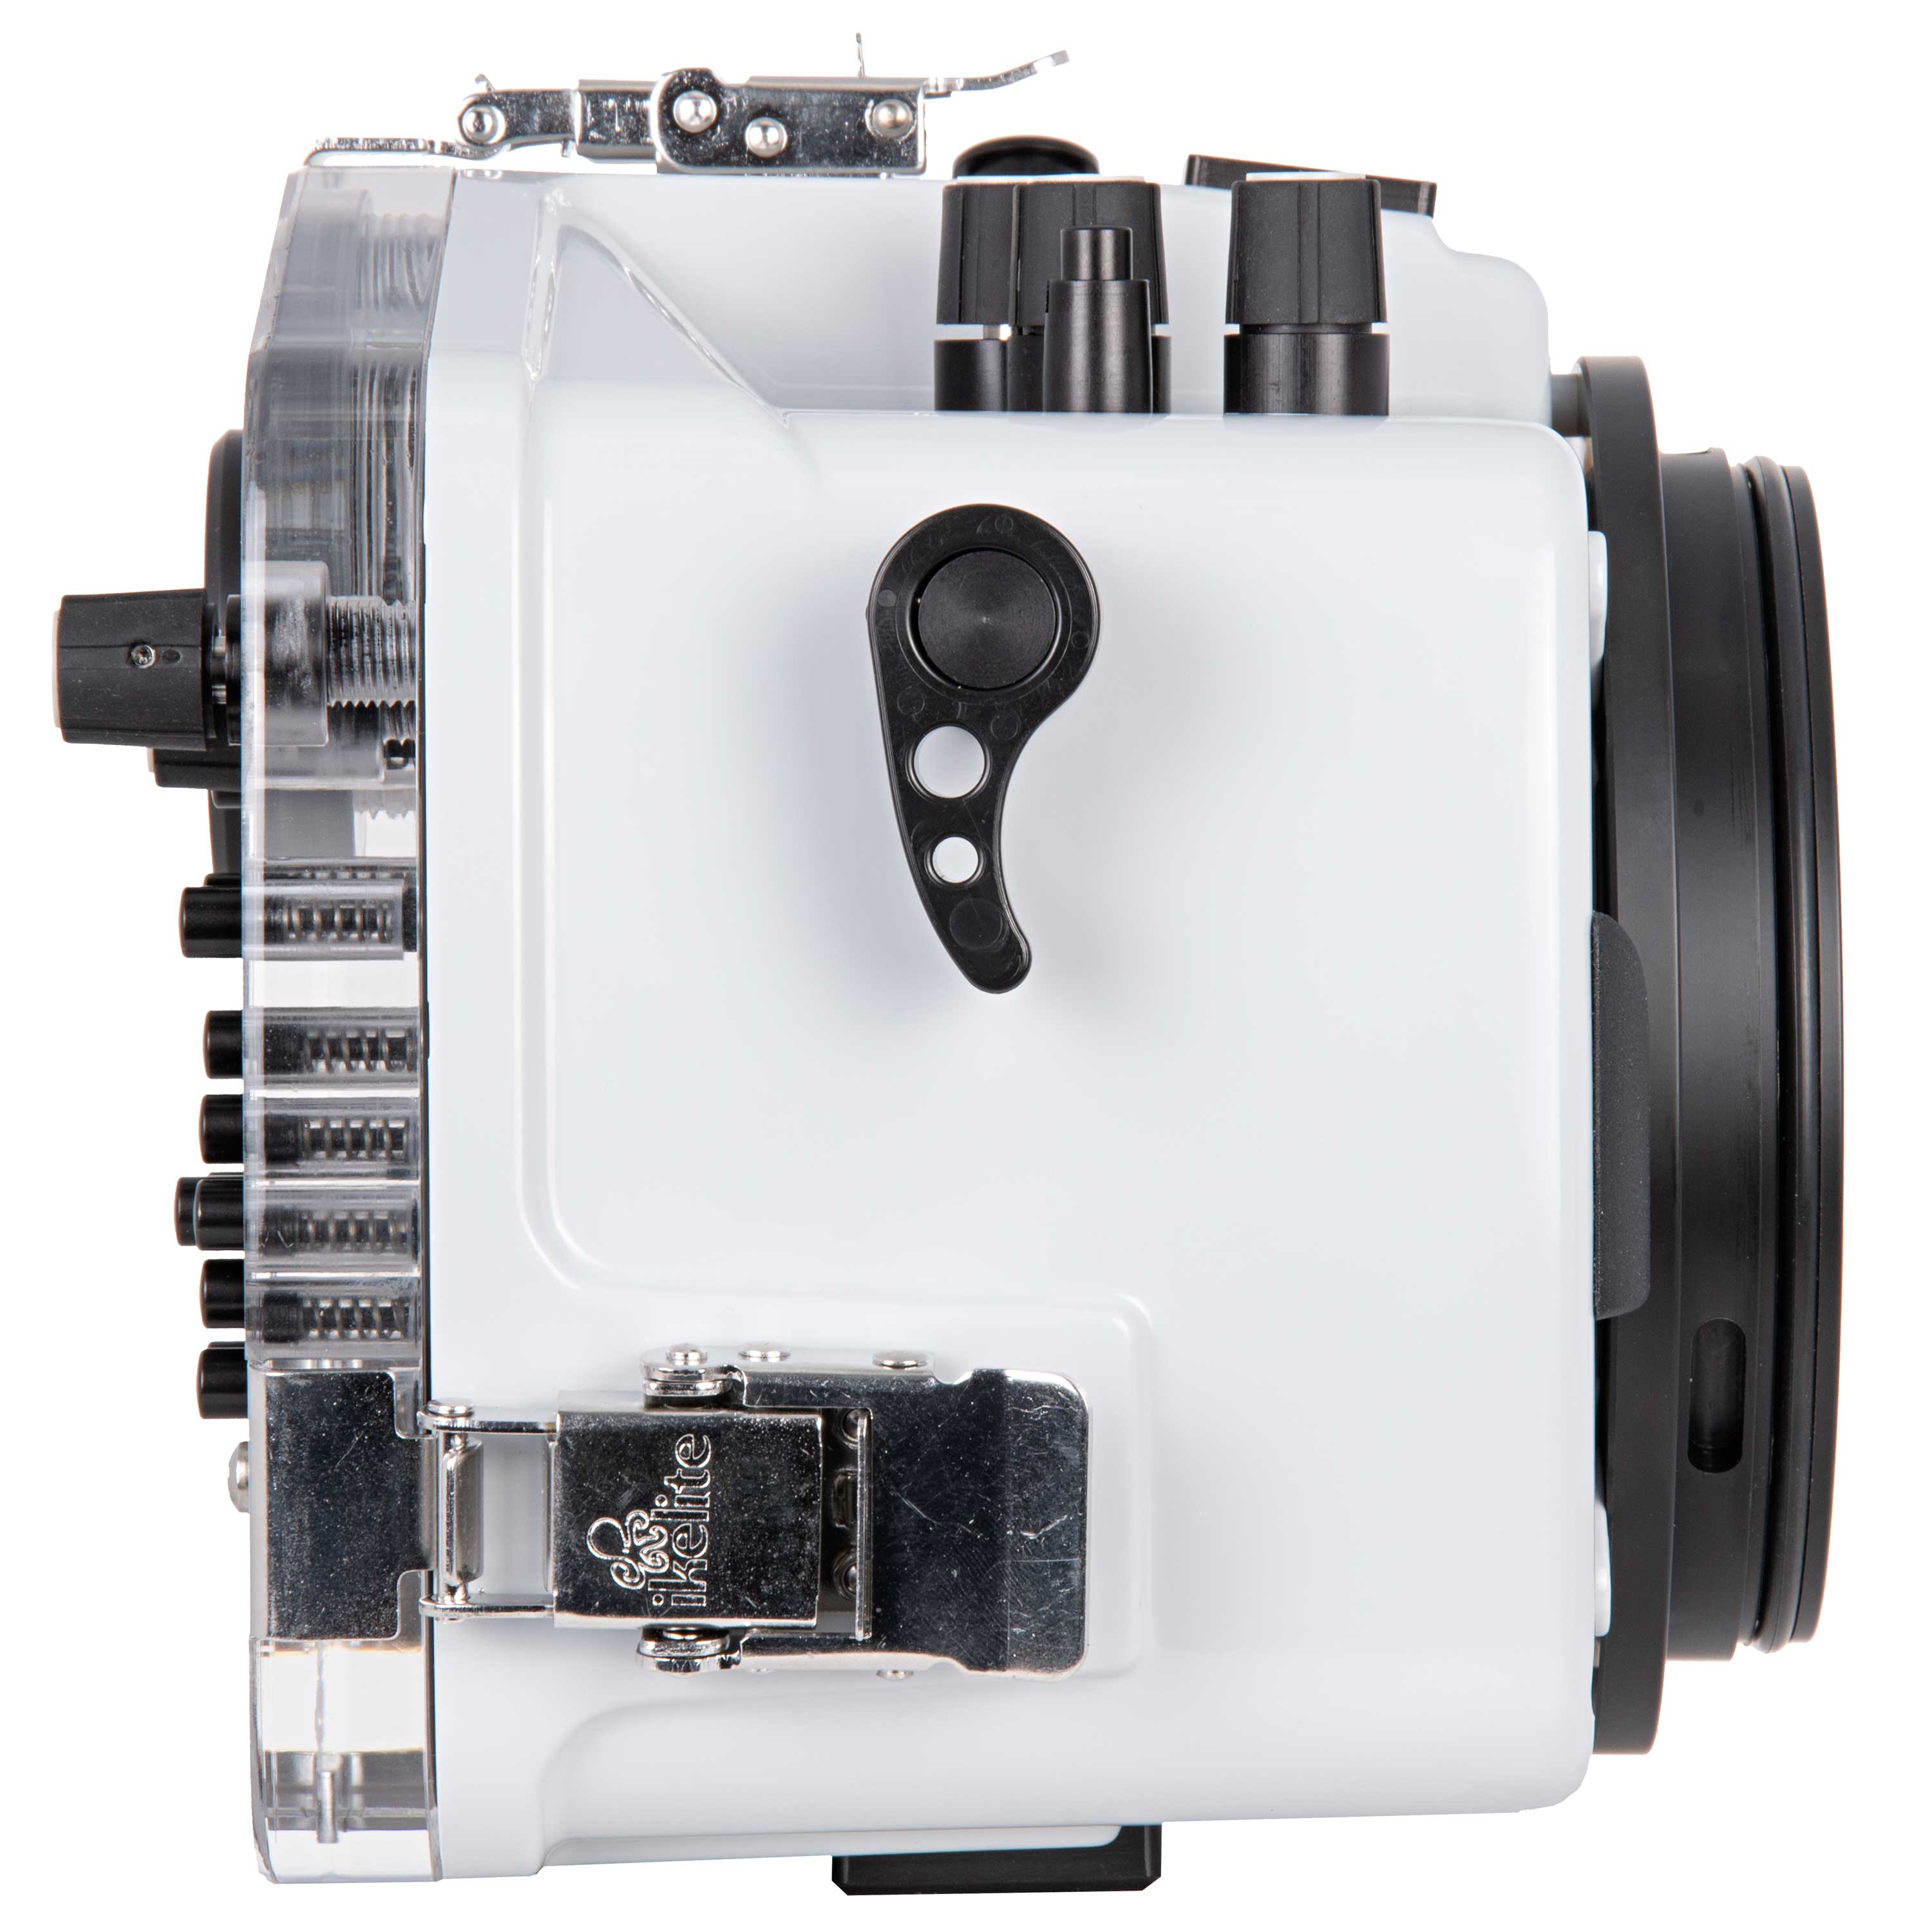 Ikelite Underwater Housing for Sony Alpha A7, A7R, A7S Mirrorless Cameras